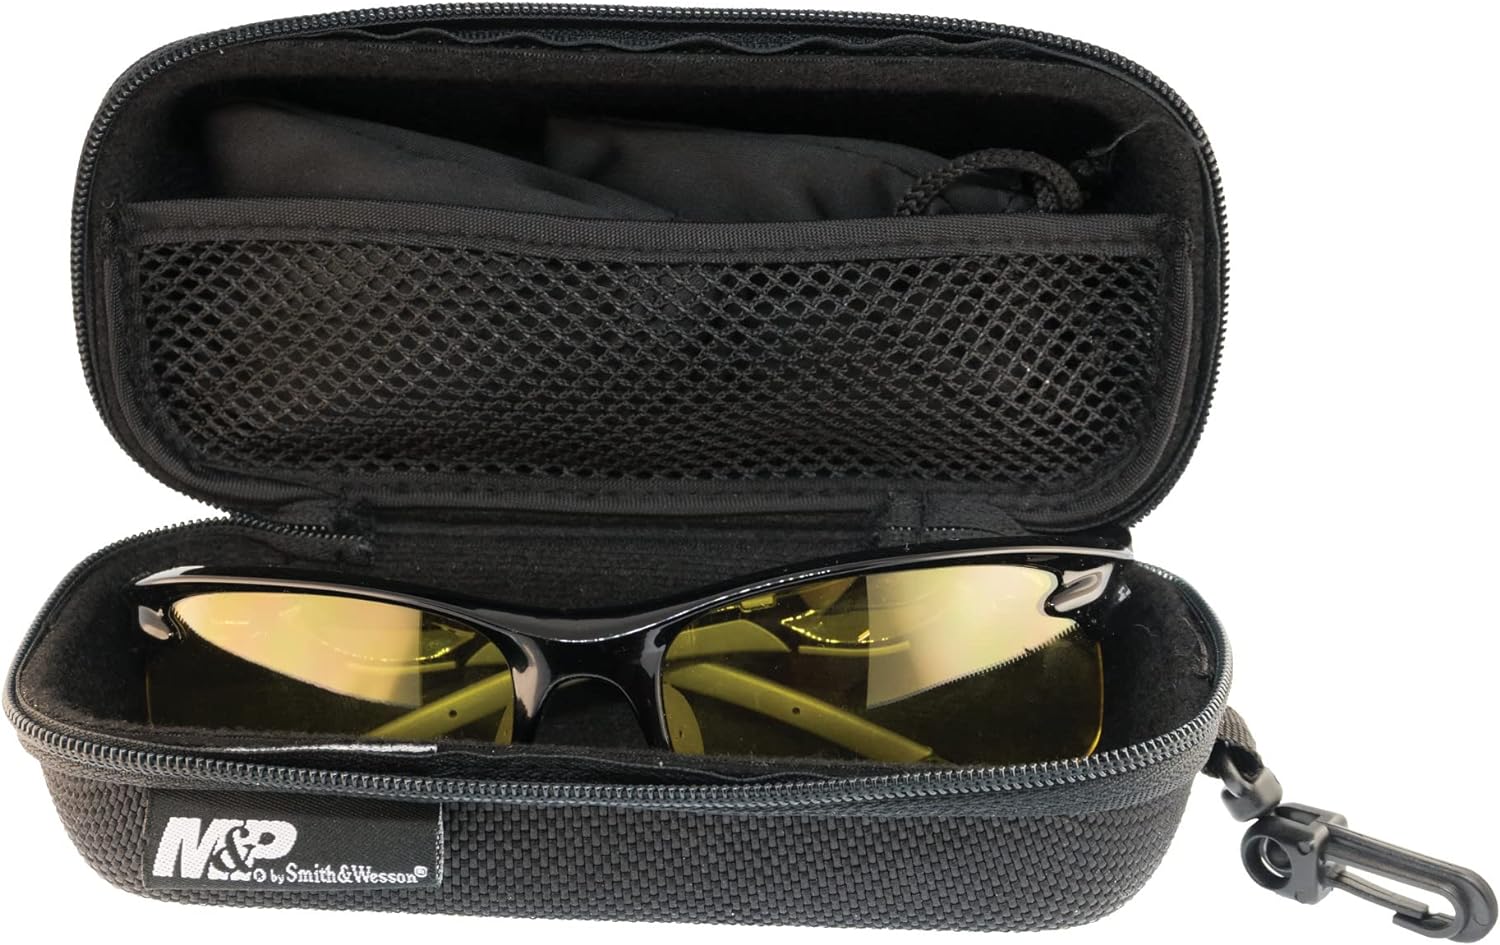 SMITH & WESSON M&P HARRIER HALF FRAME INTERCHANGEABLE SHOOTING GLASSES ...